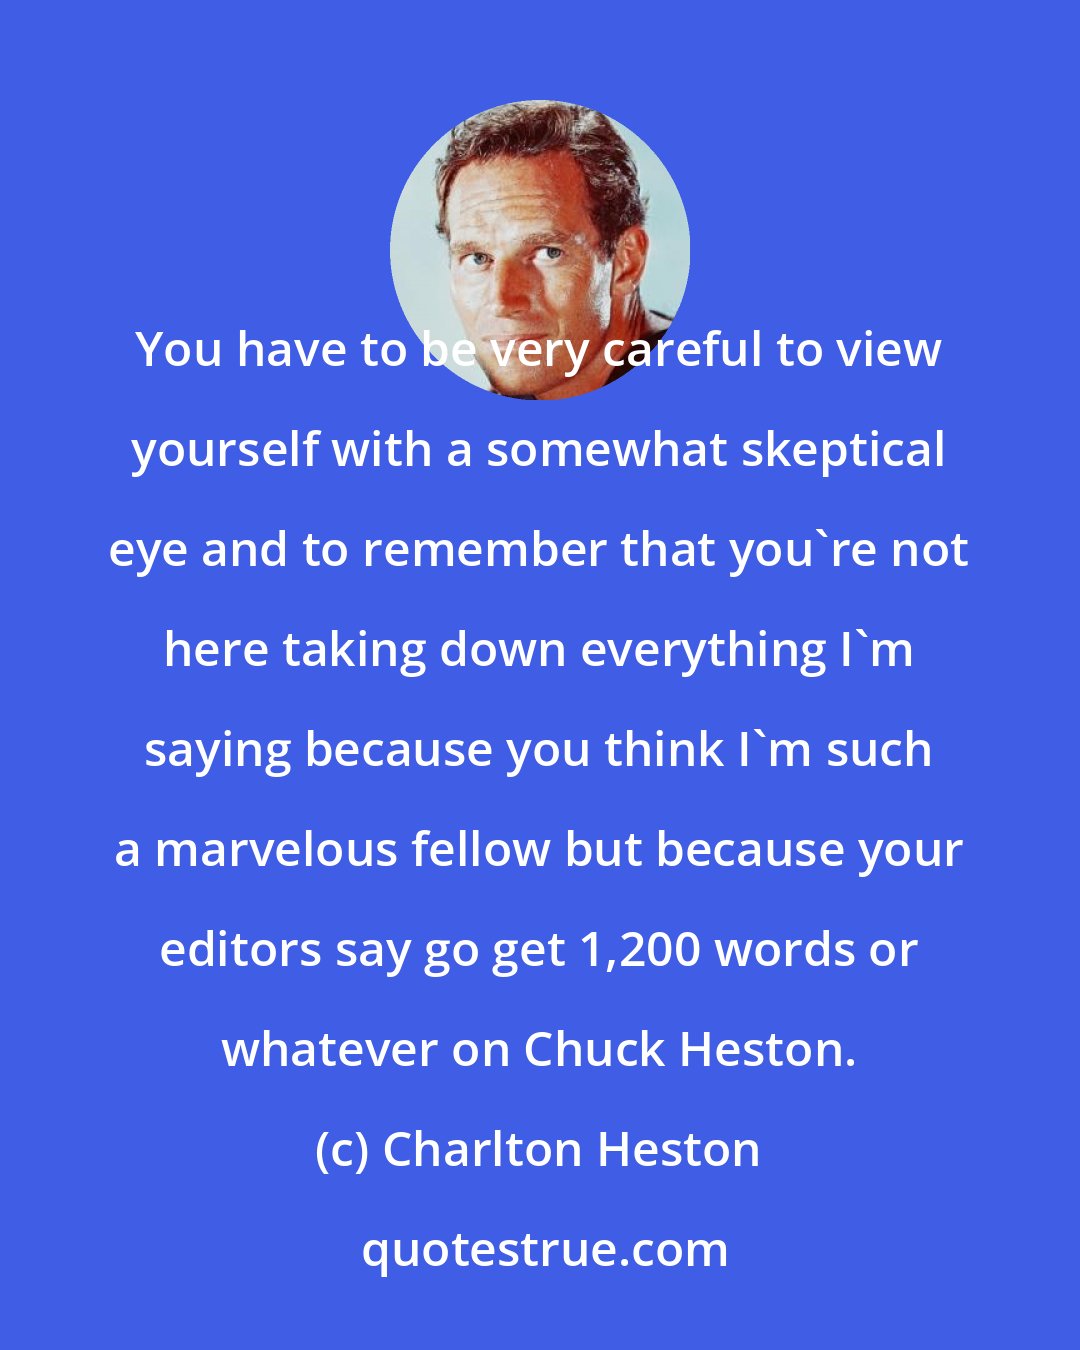 Charlton Heston: You have to be very careful to view yourself with a somewhat skeptical eye and to remember that you're not here taking down everything I'm saying because you think I'm such a marvelous fellow but because your editors say go get 1,200 words or whatever on Chuck Heston.